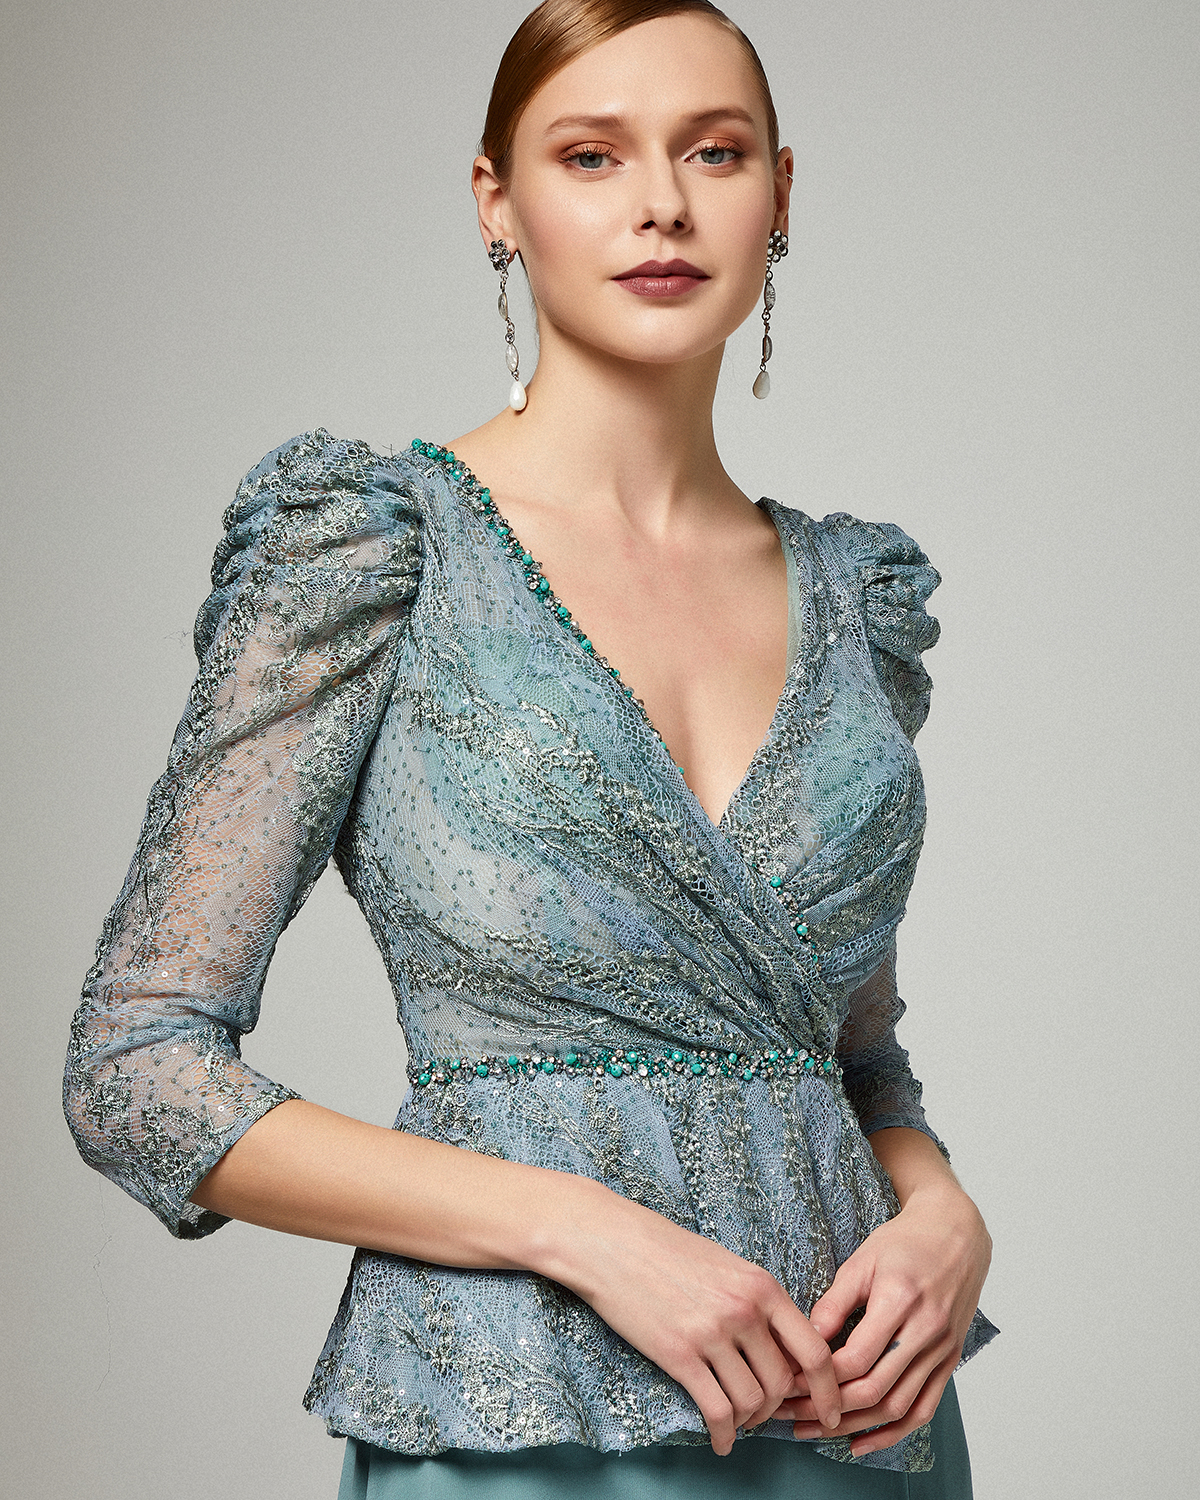 Long evening dress with lace top and long sleeves for the mother of the bride